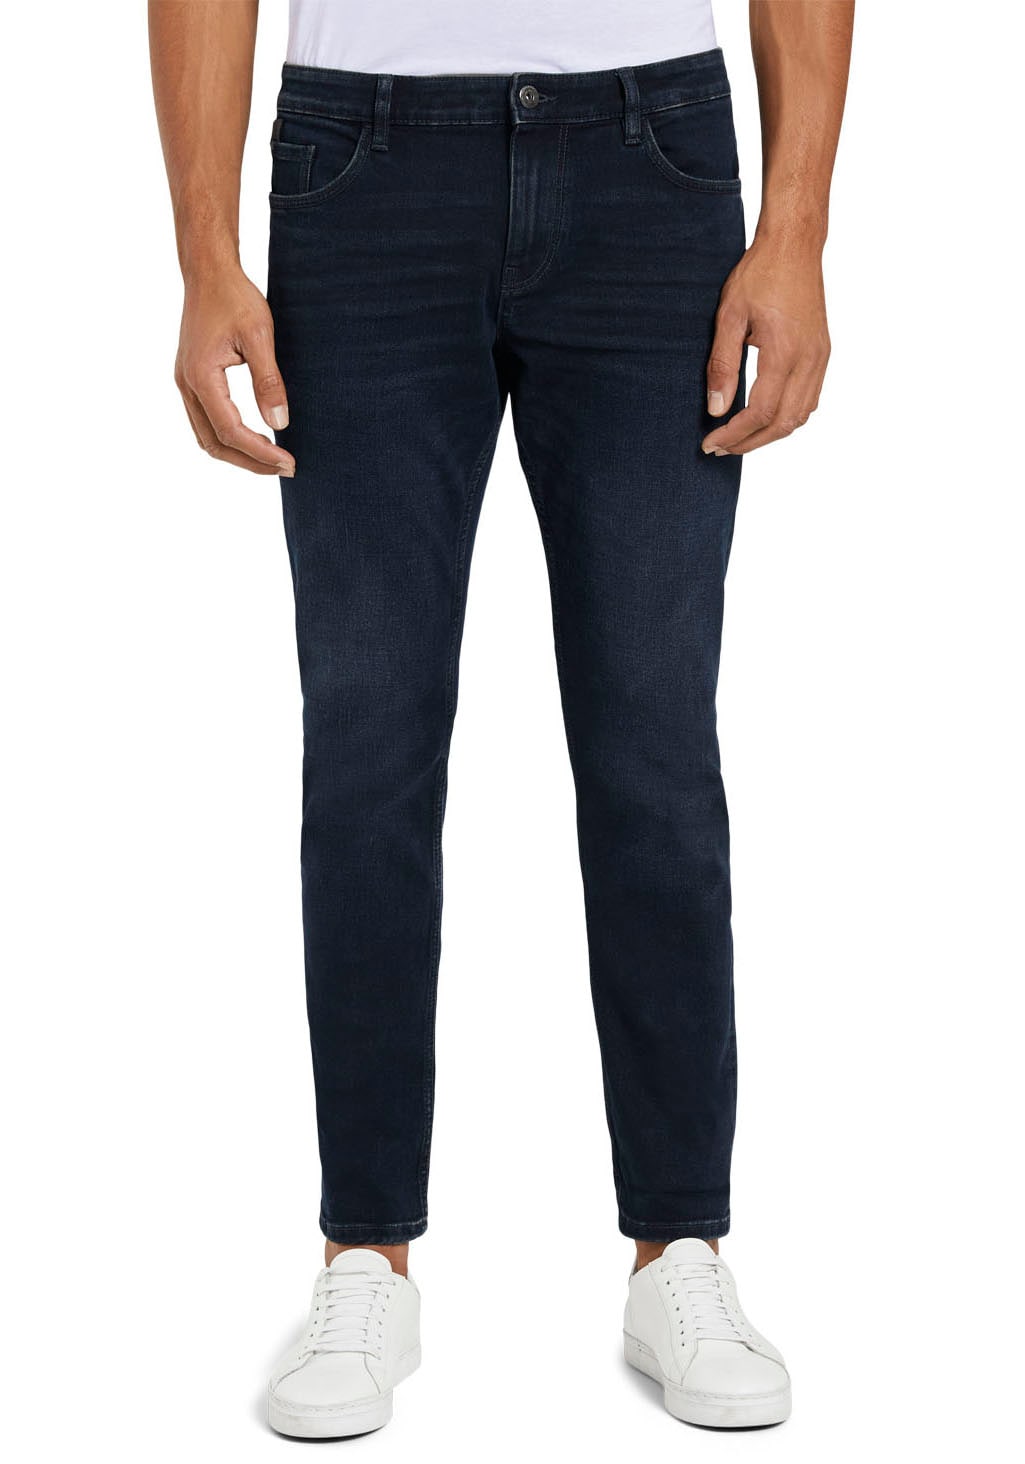 TOM TAILOR 5-Pocket-Jeans »Josh«, in Used-Waschung von TOM TAILOR